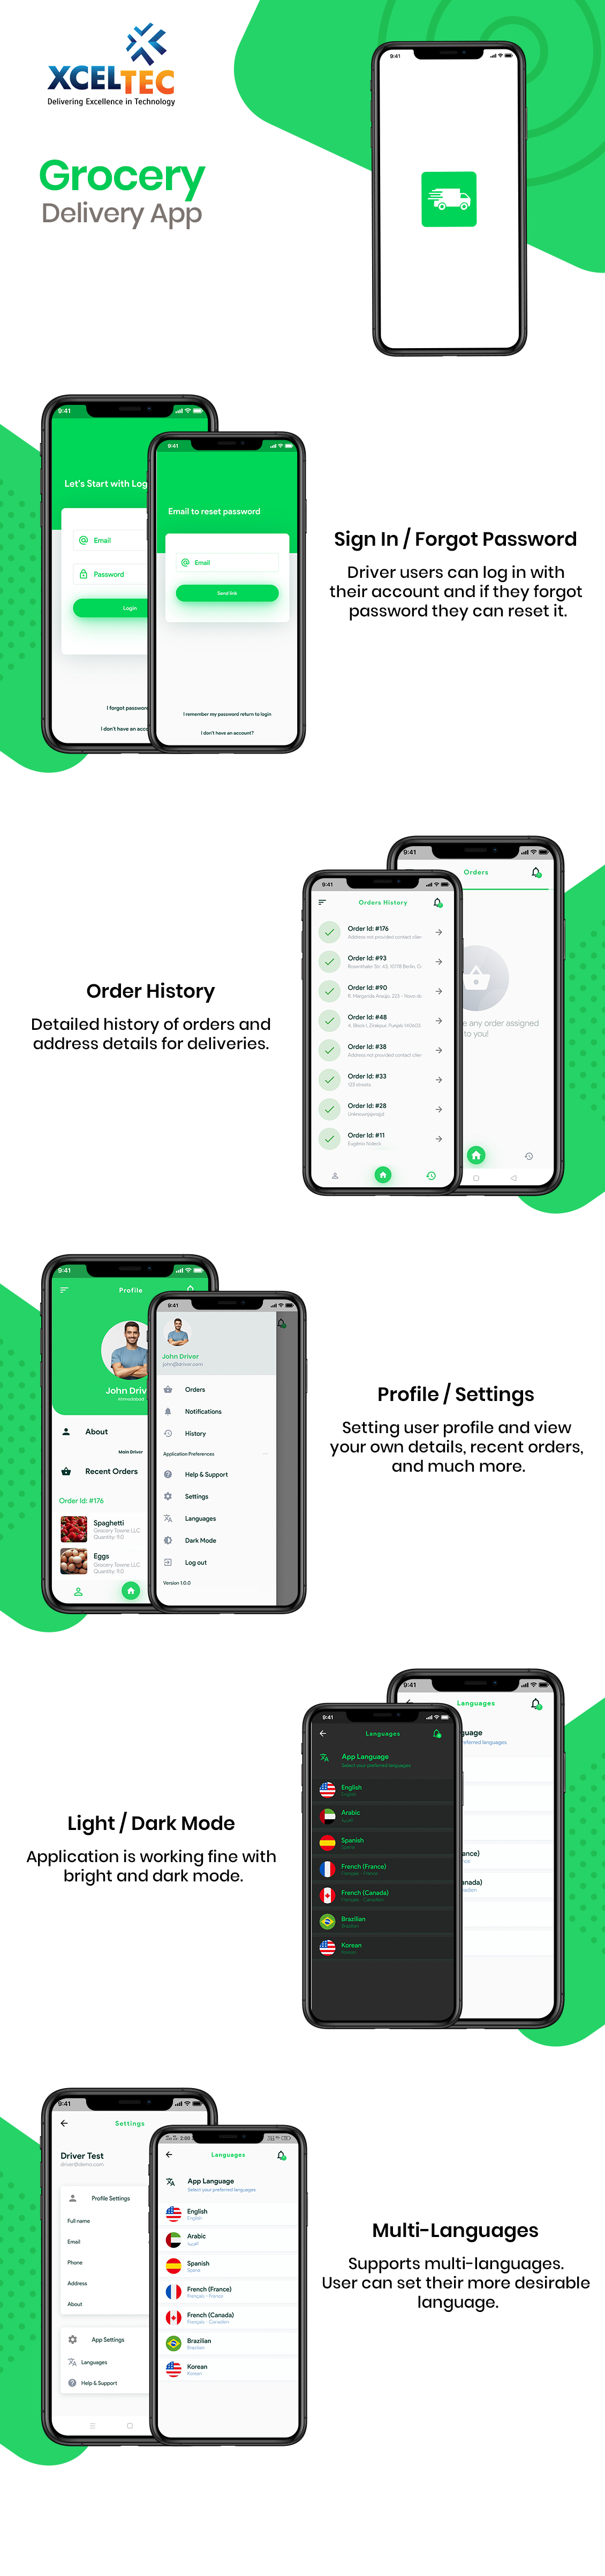 Online Grocery Delivery App